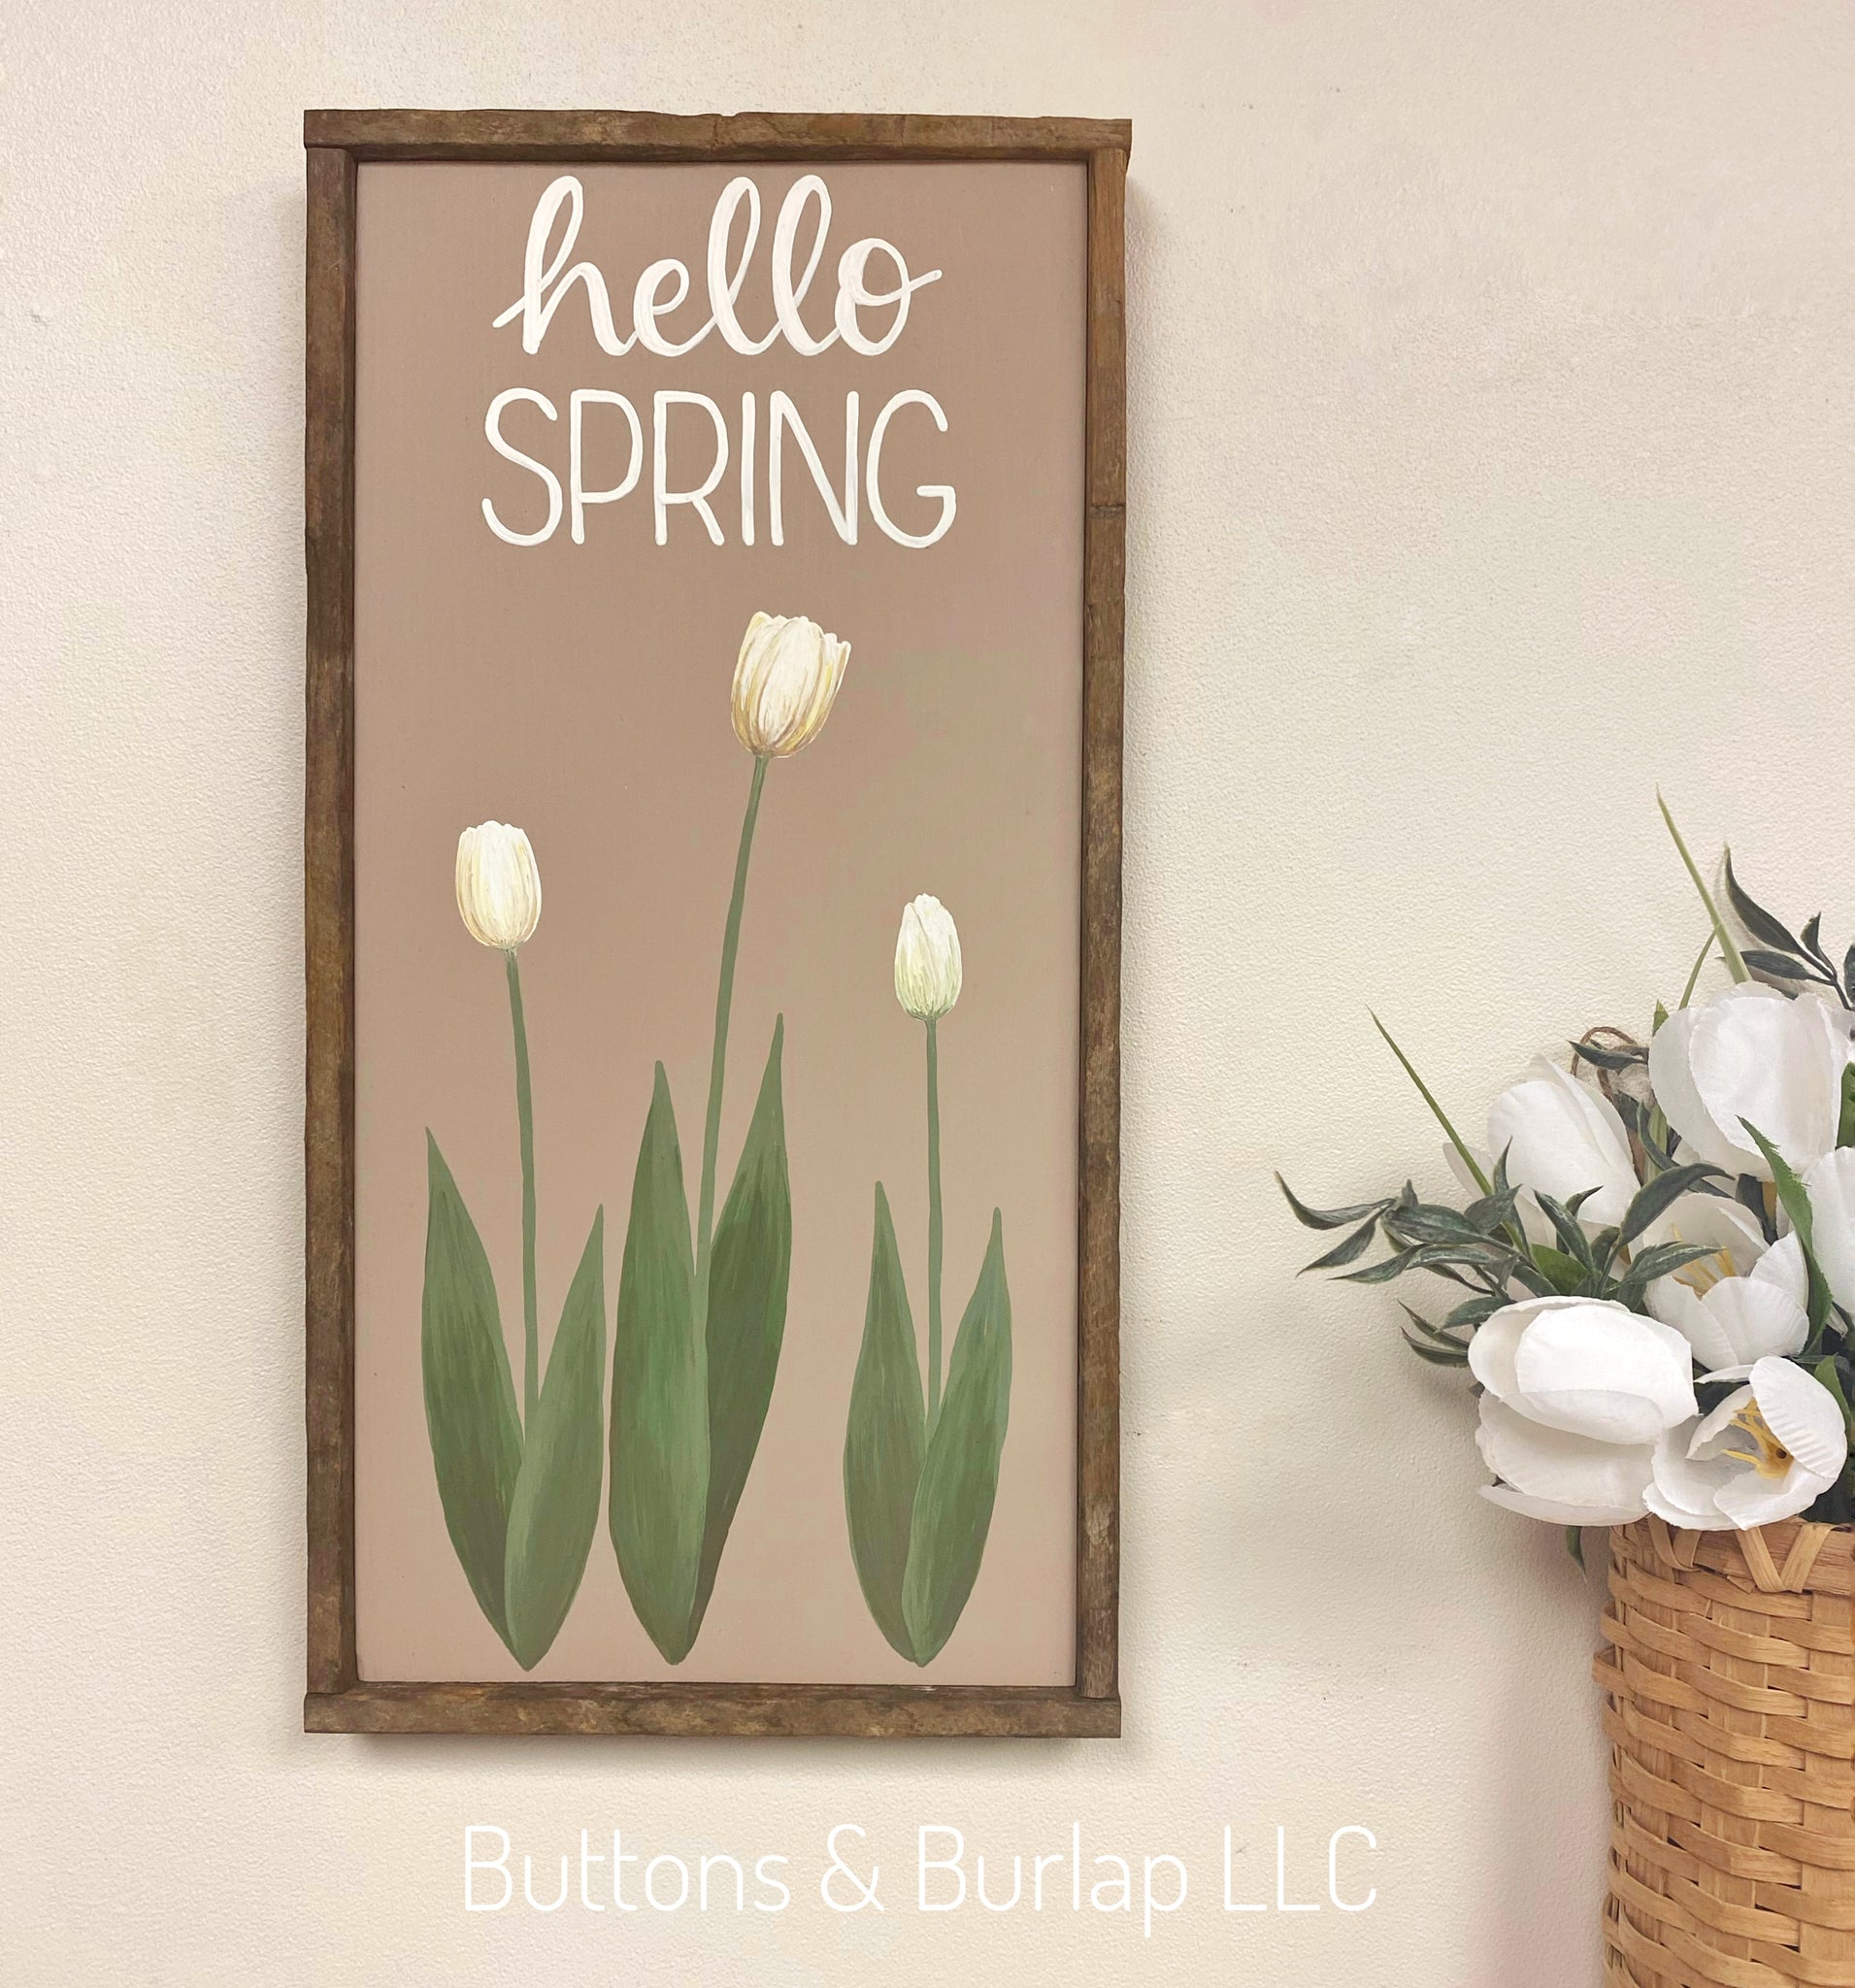 Hello spring, tulips sign